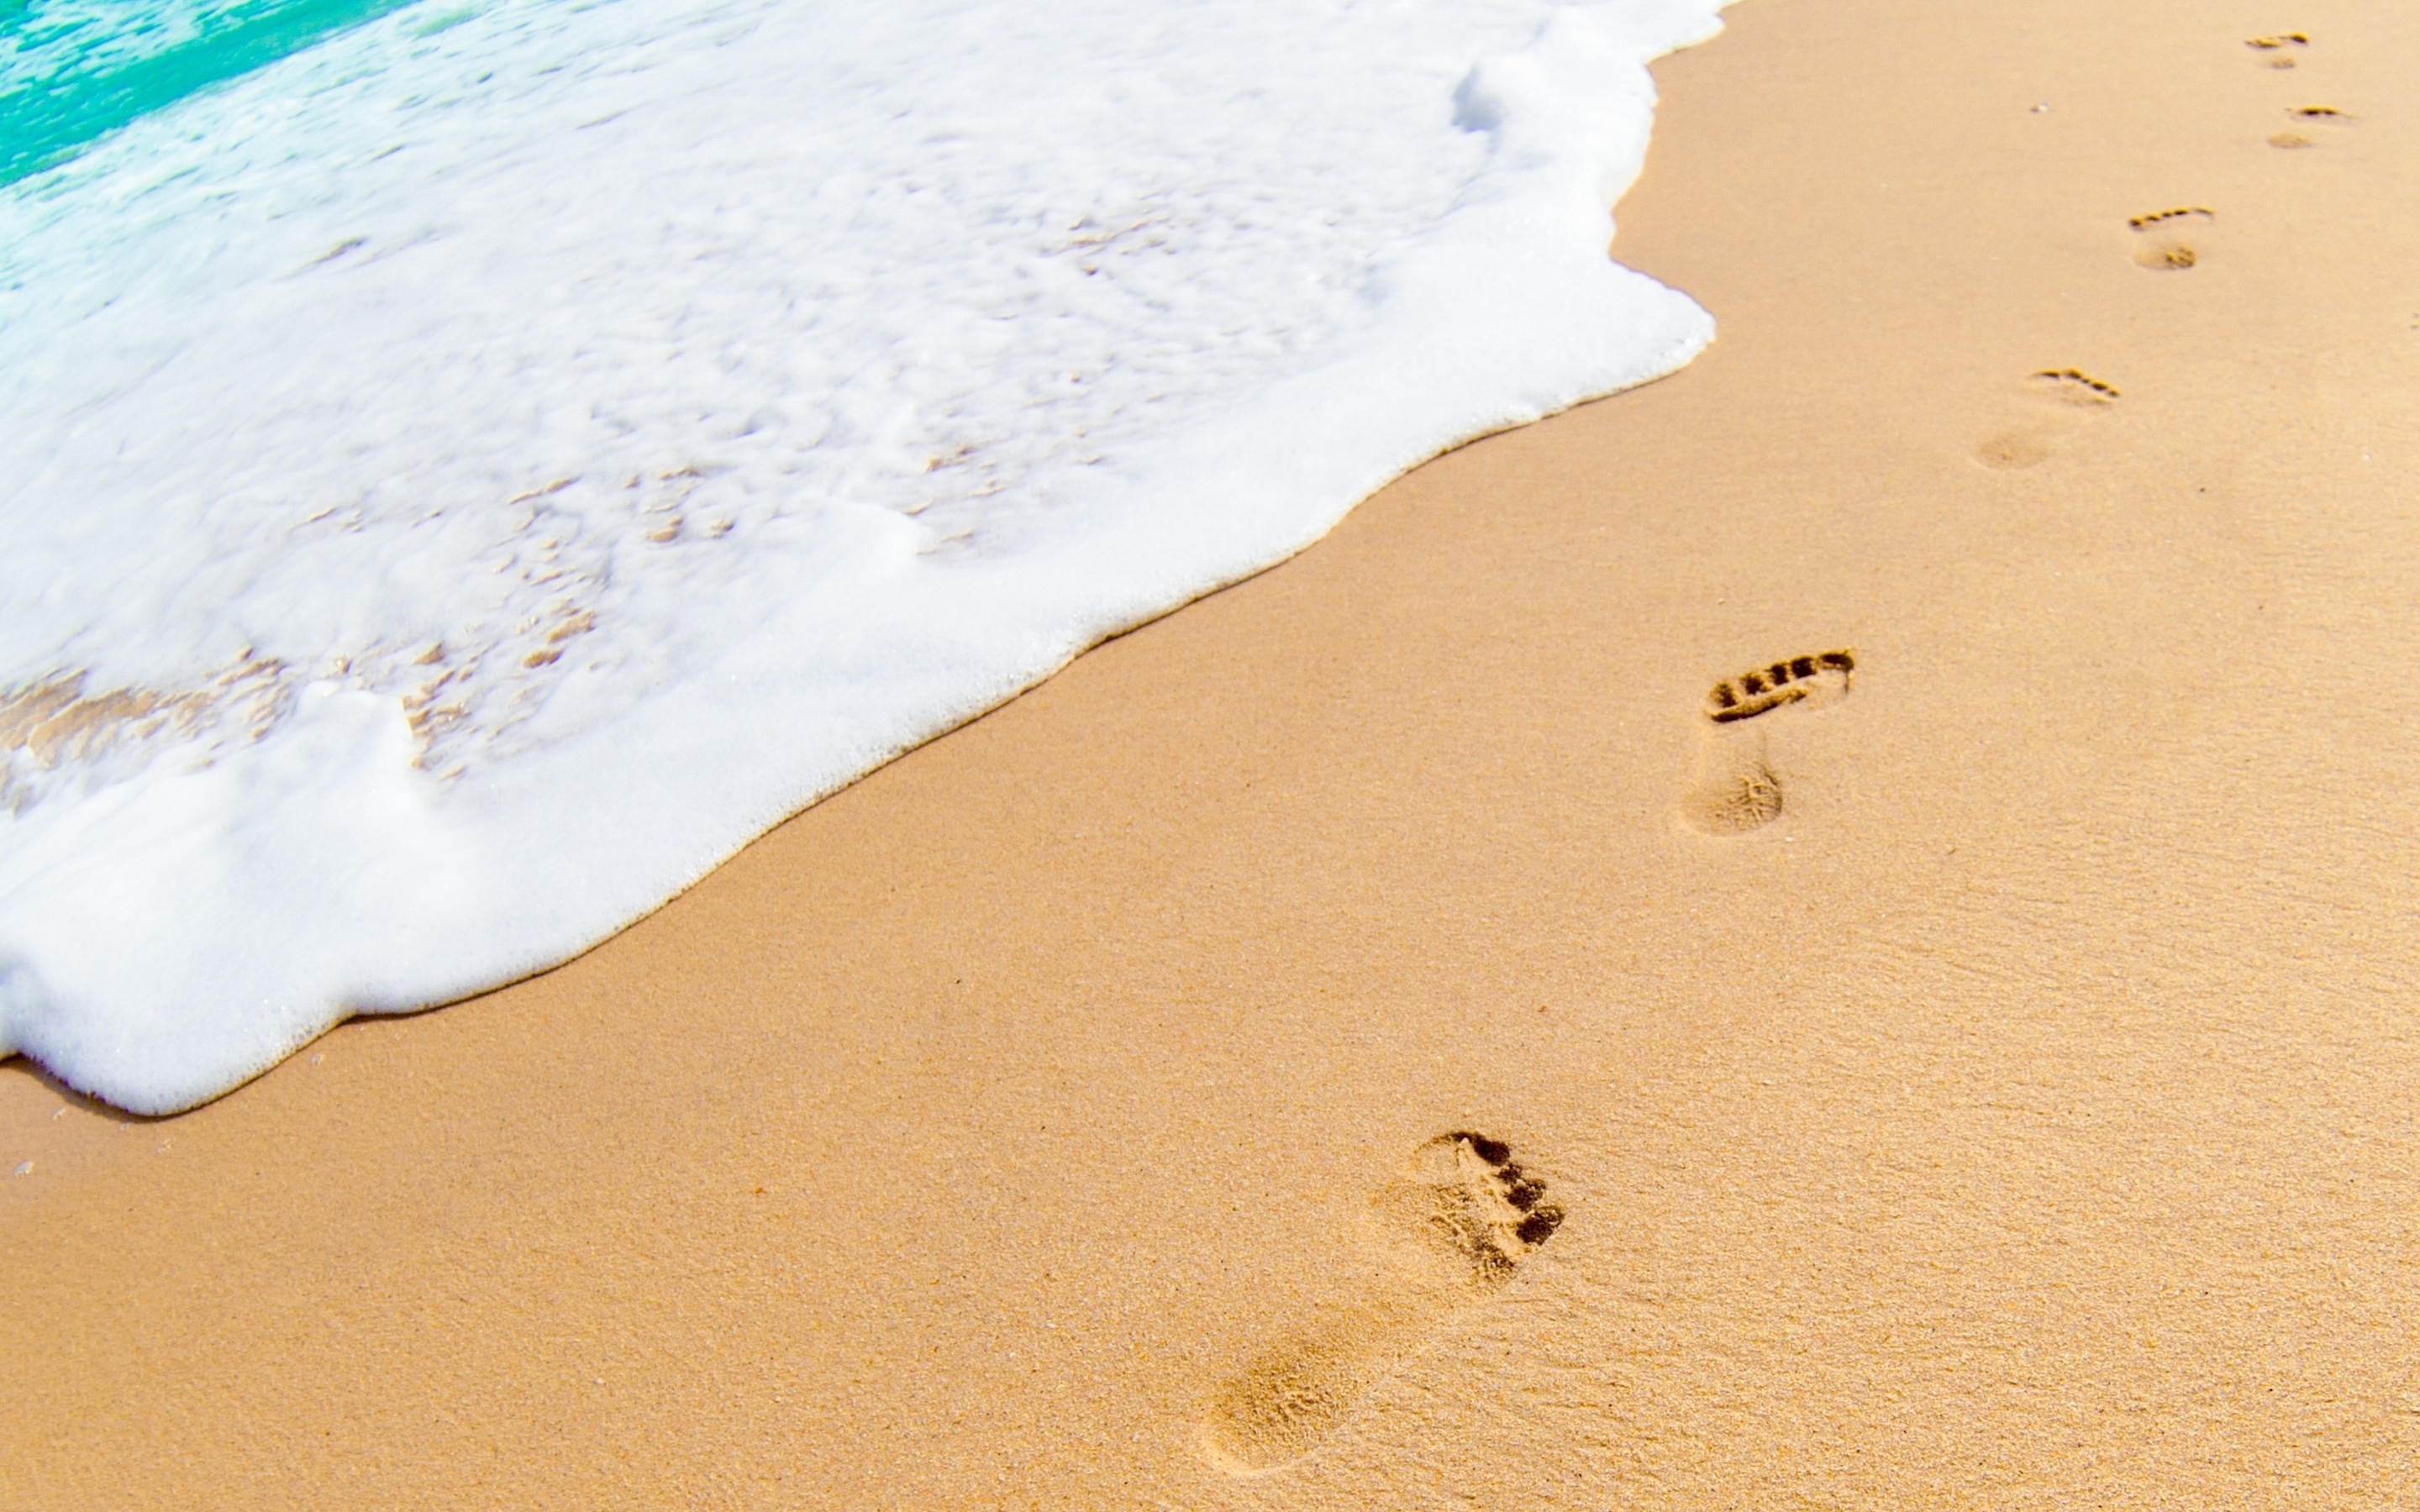 Footprints in the Sand for 2880 x 1800 Retina Display resolution